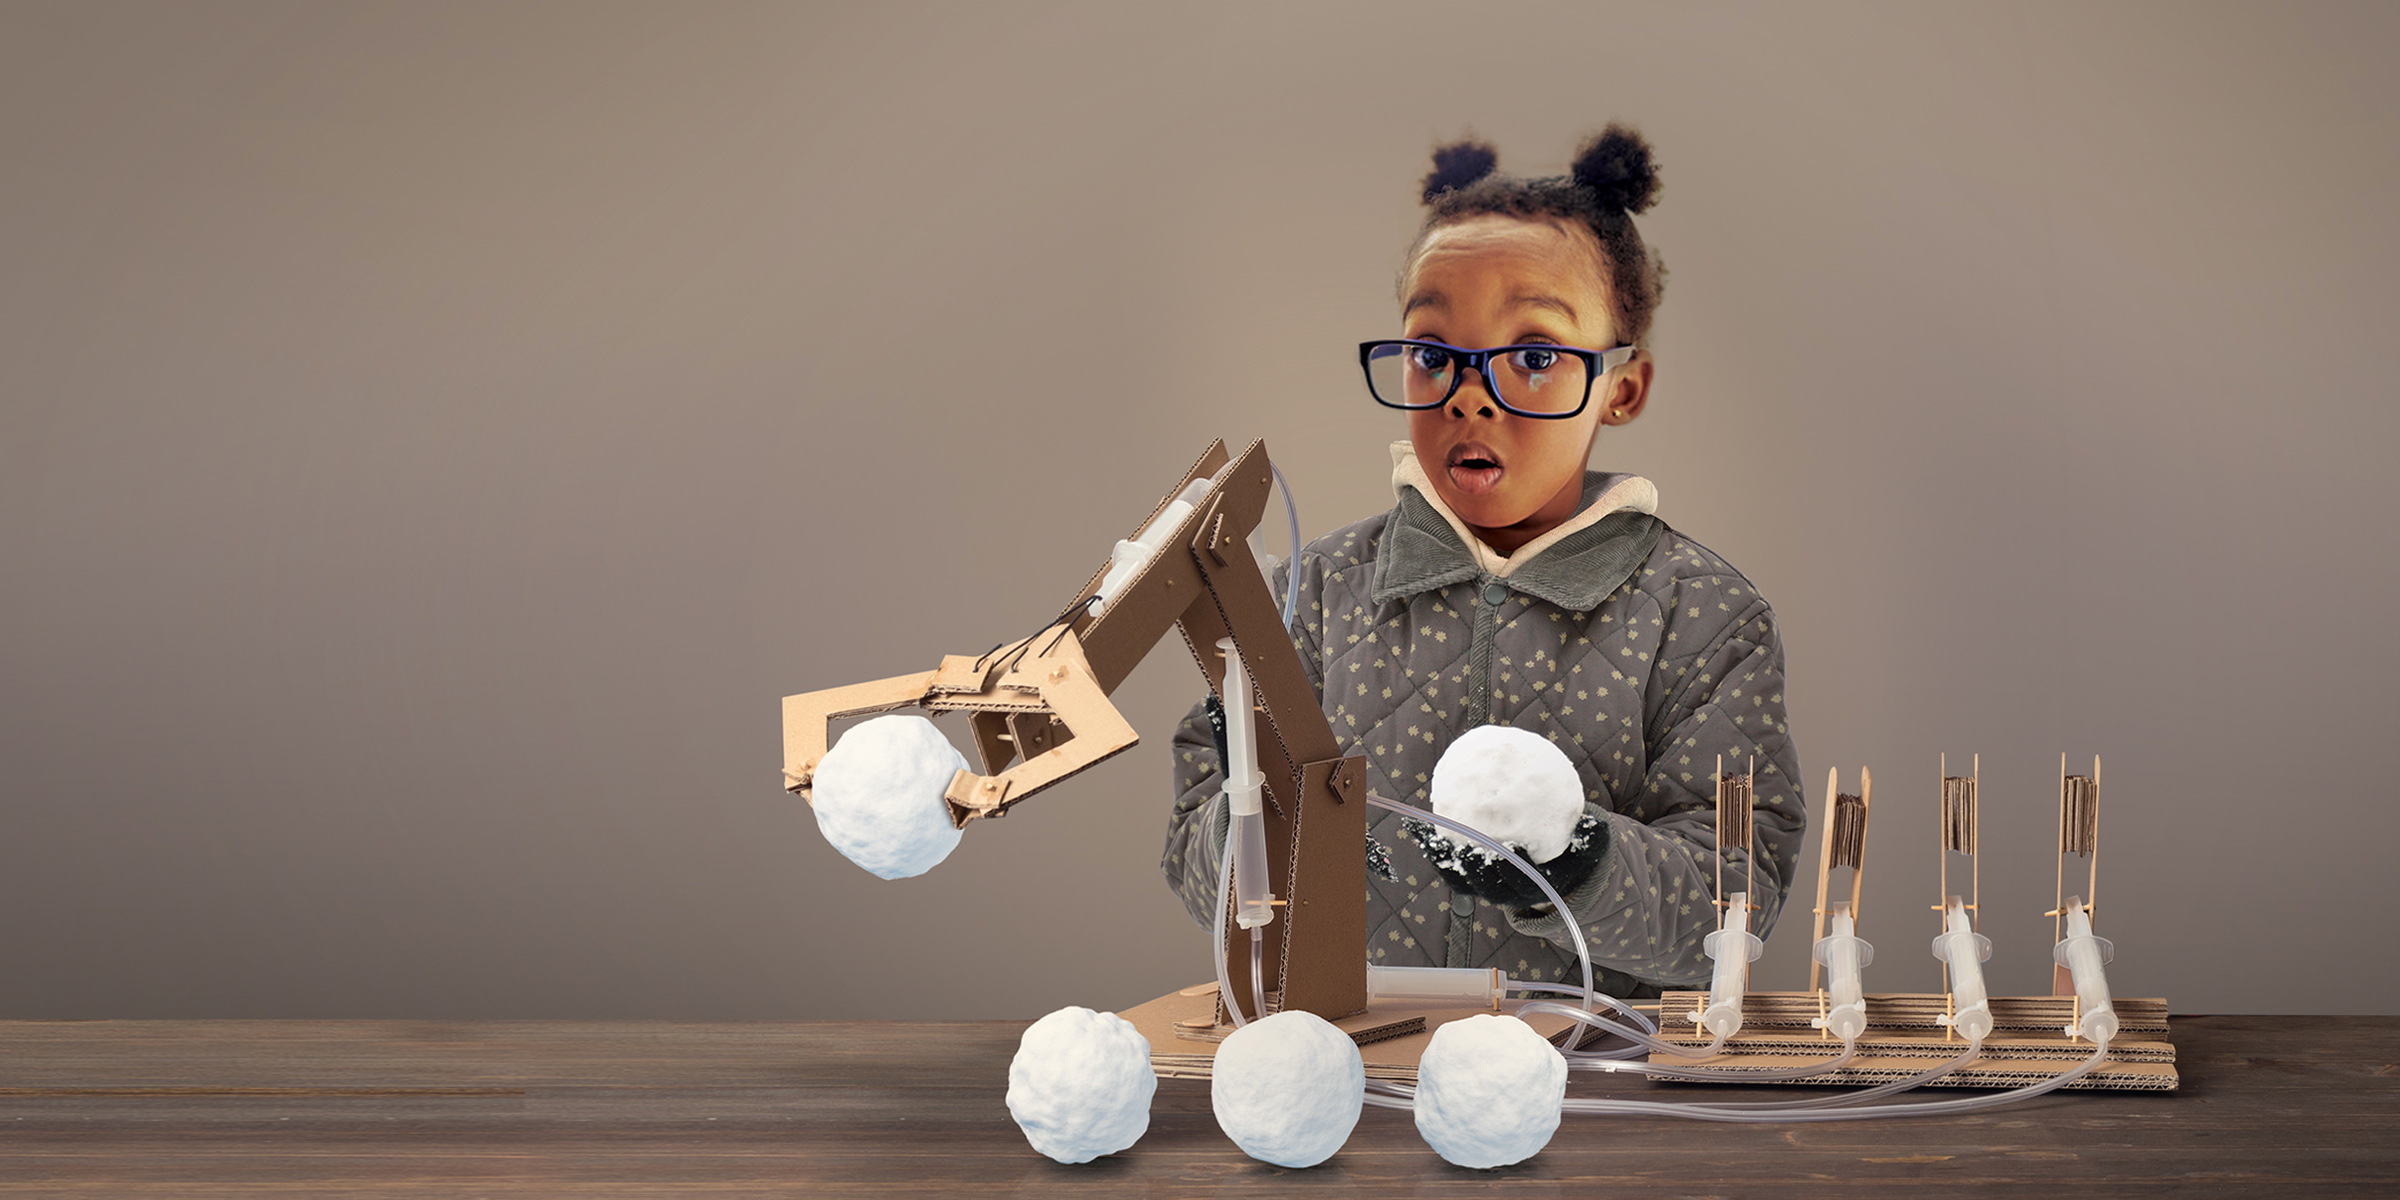 Little girl with oversized glasses holds a snow ball in her hand behind a homemade snowball making machine.